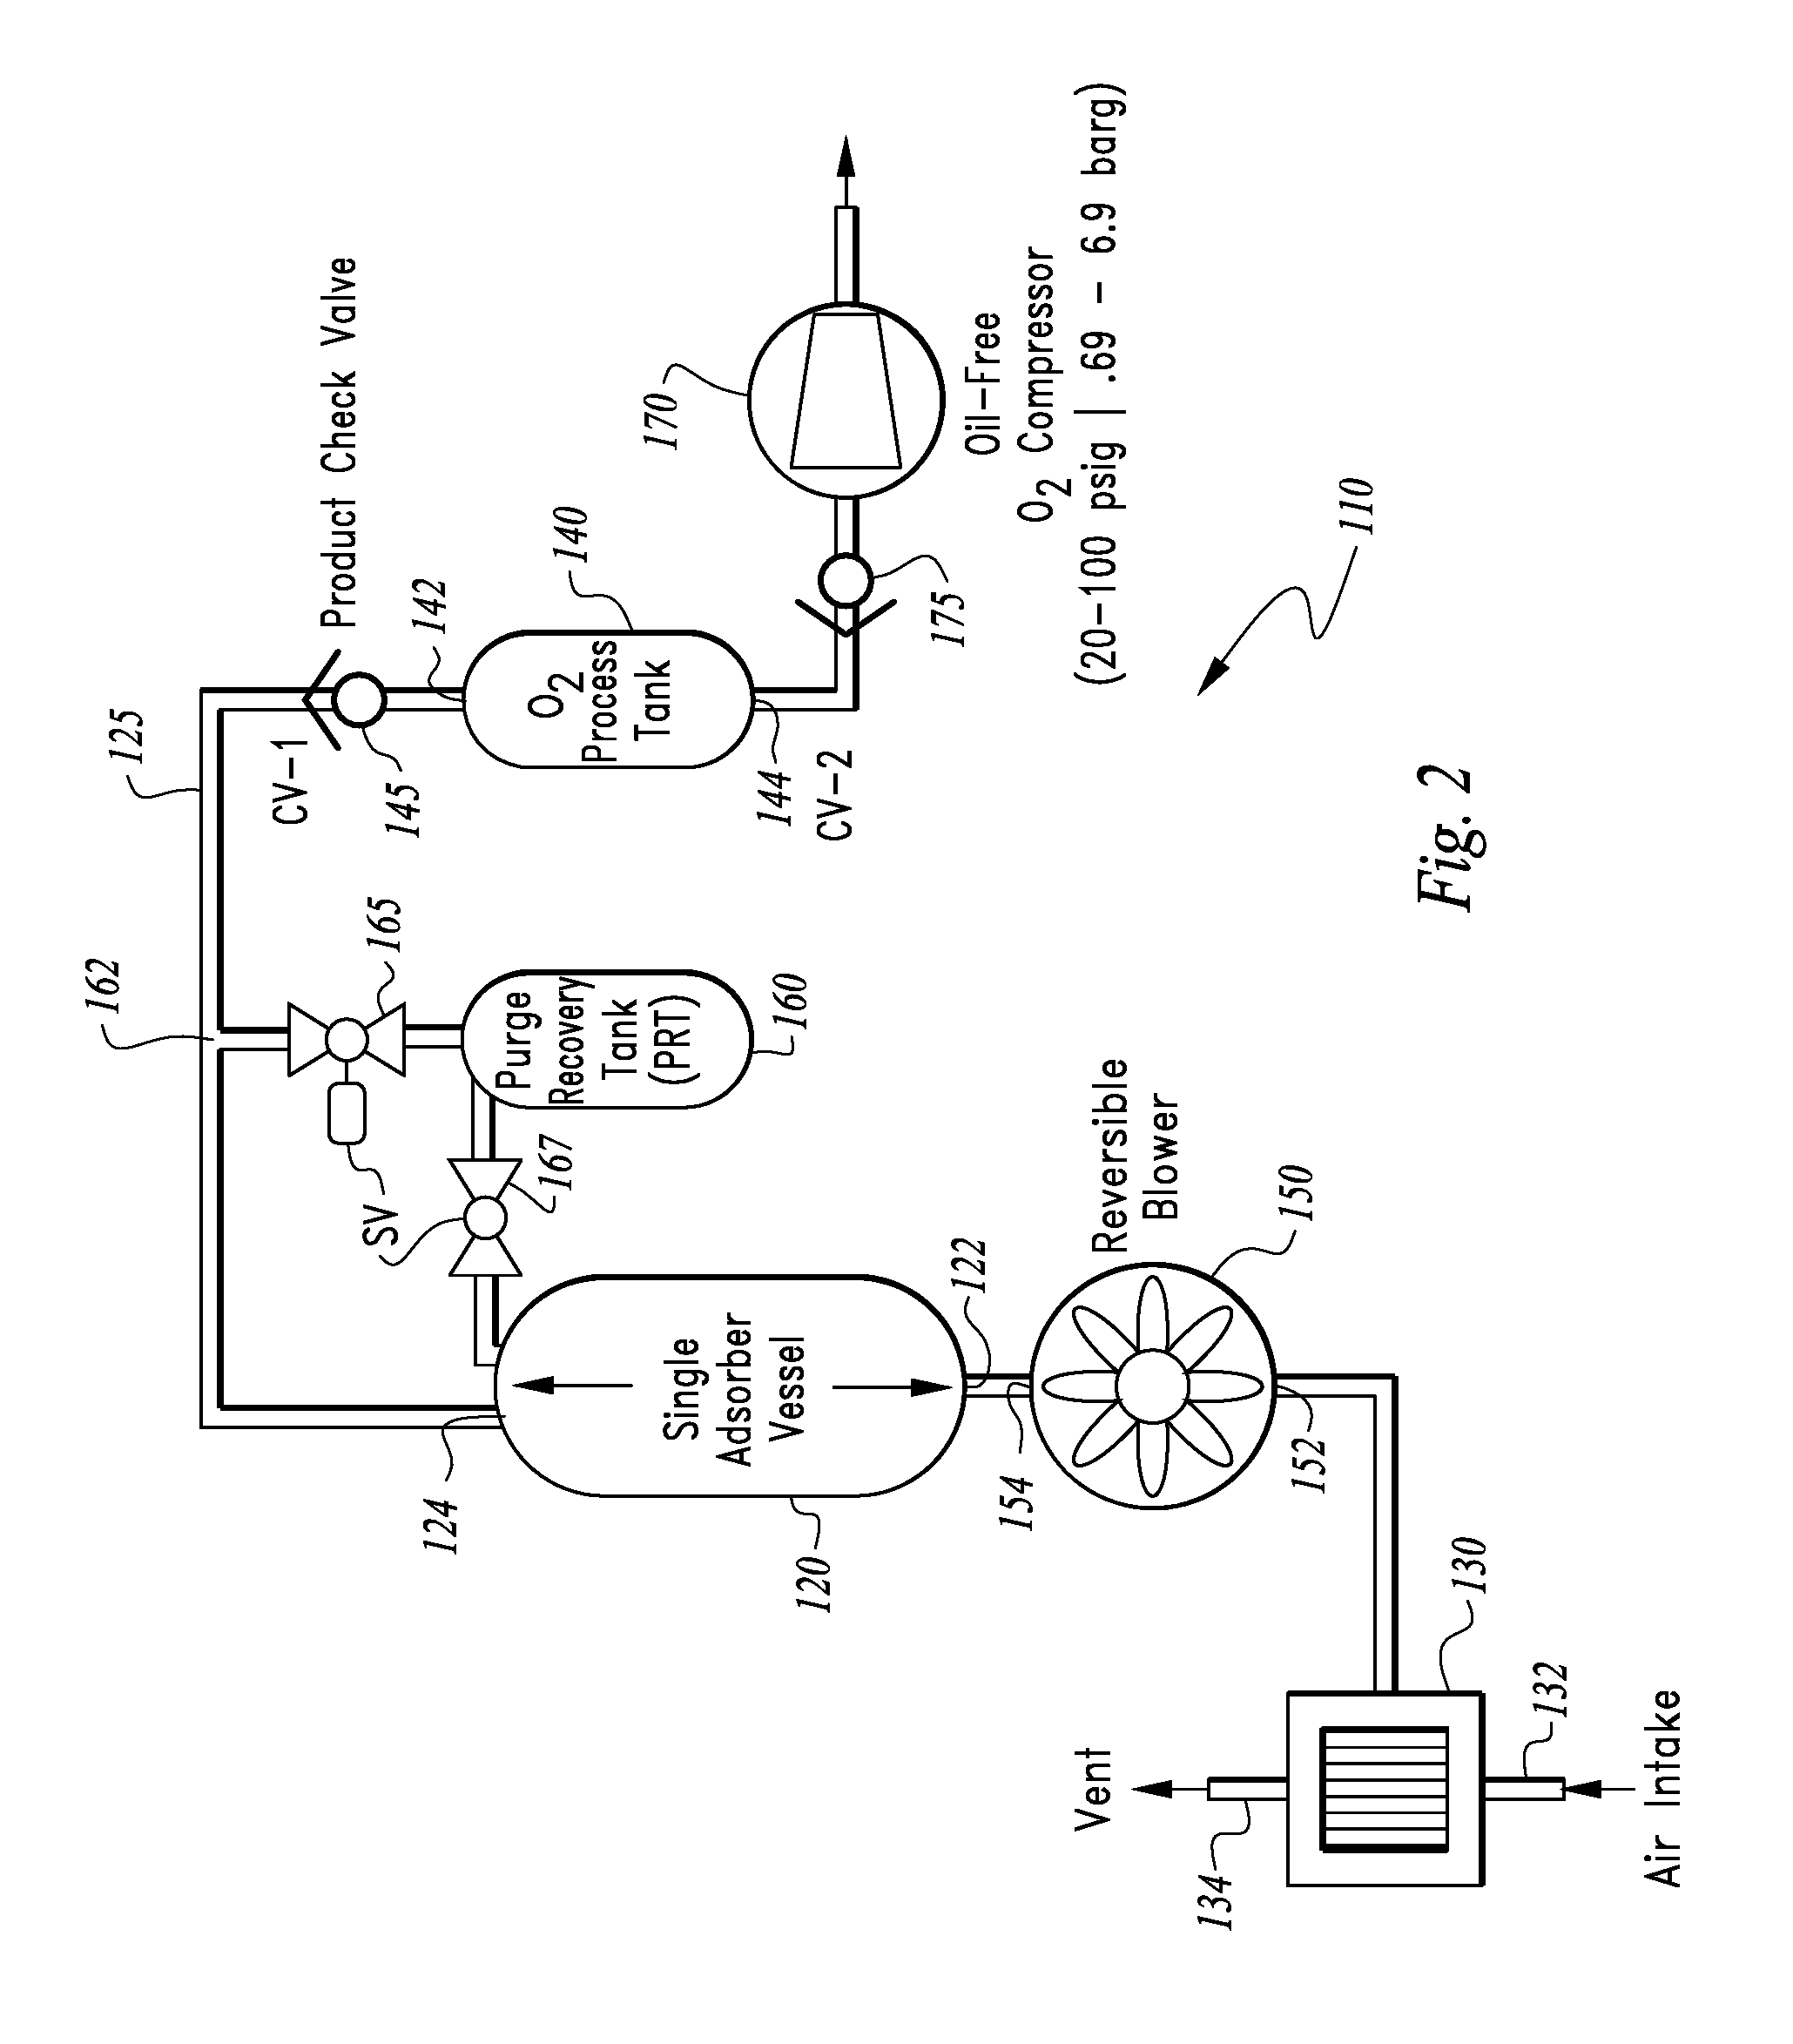 Load following single bed reversing blower adsorption air separation system